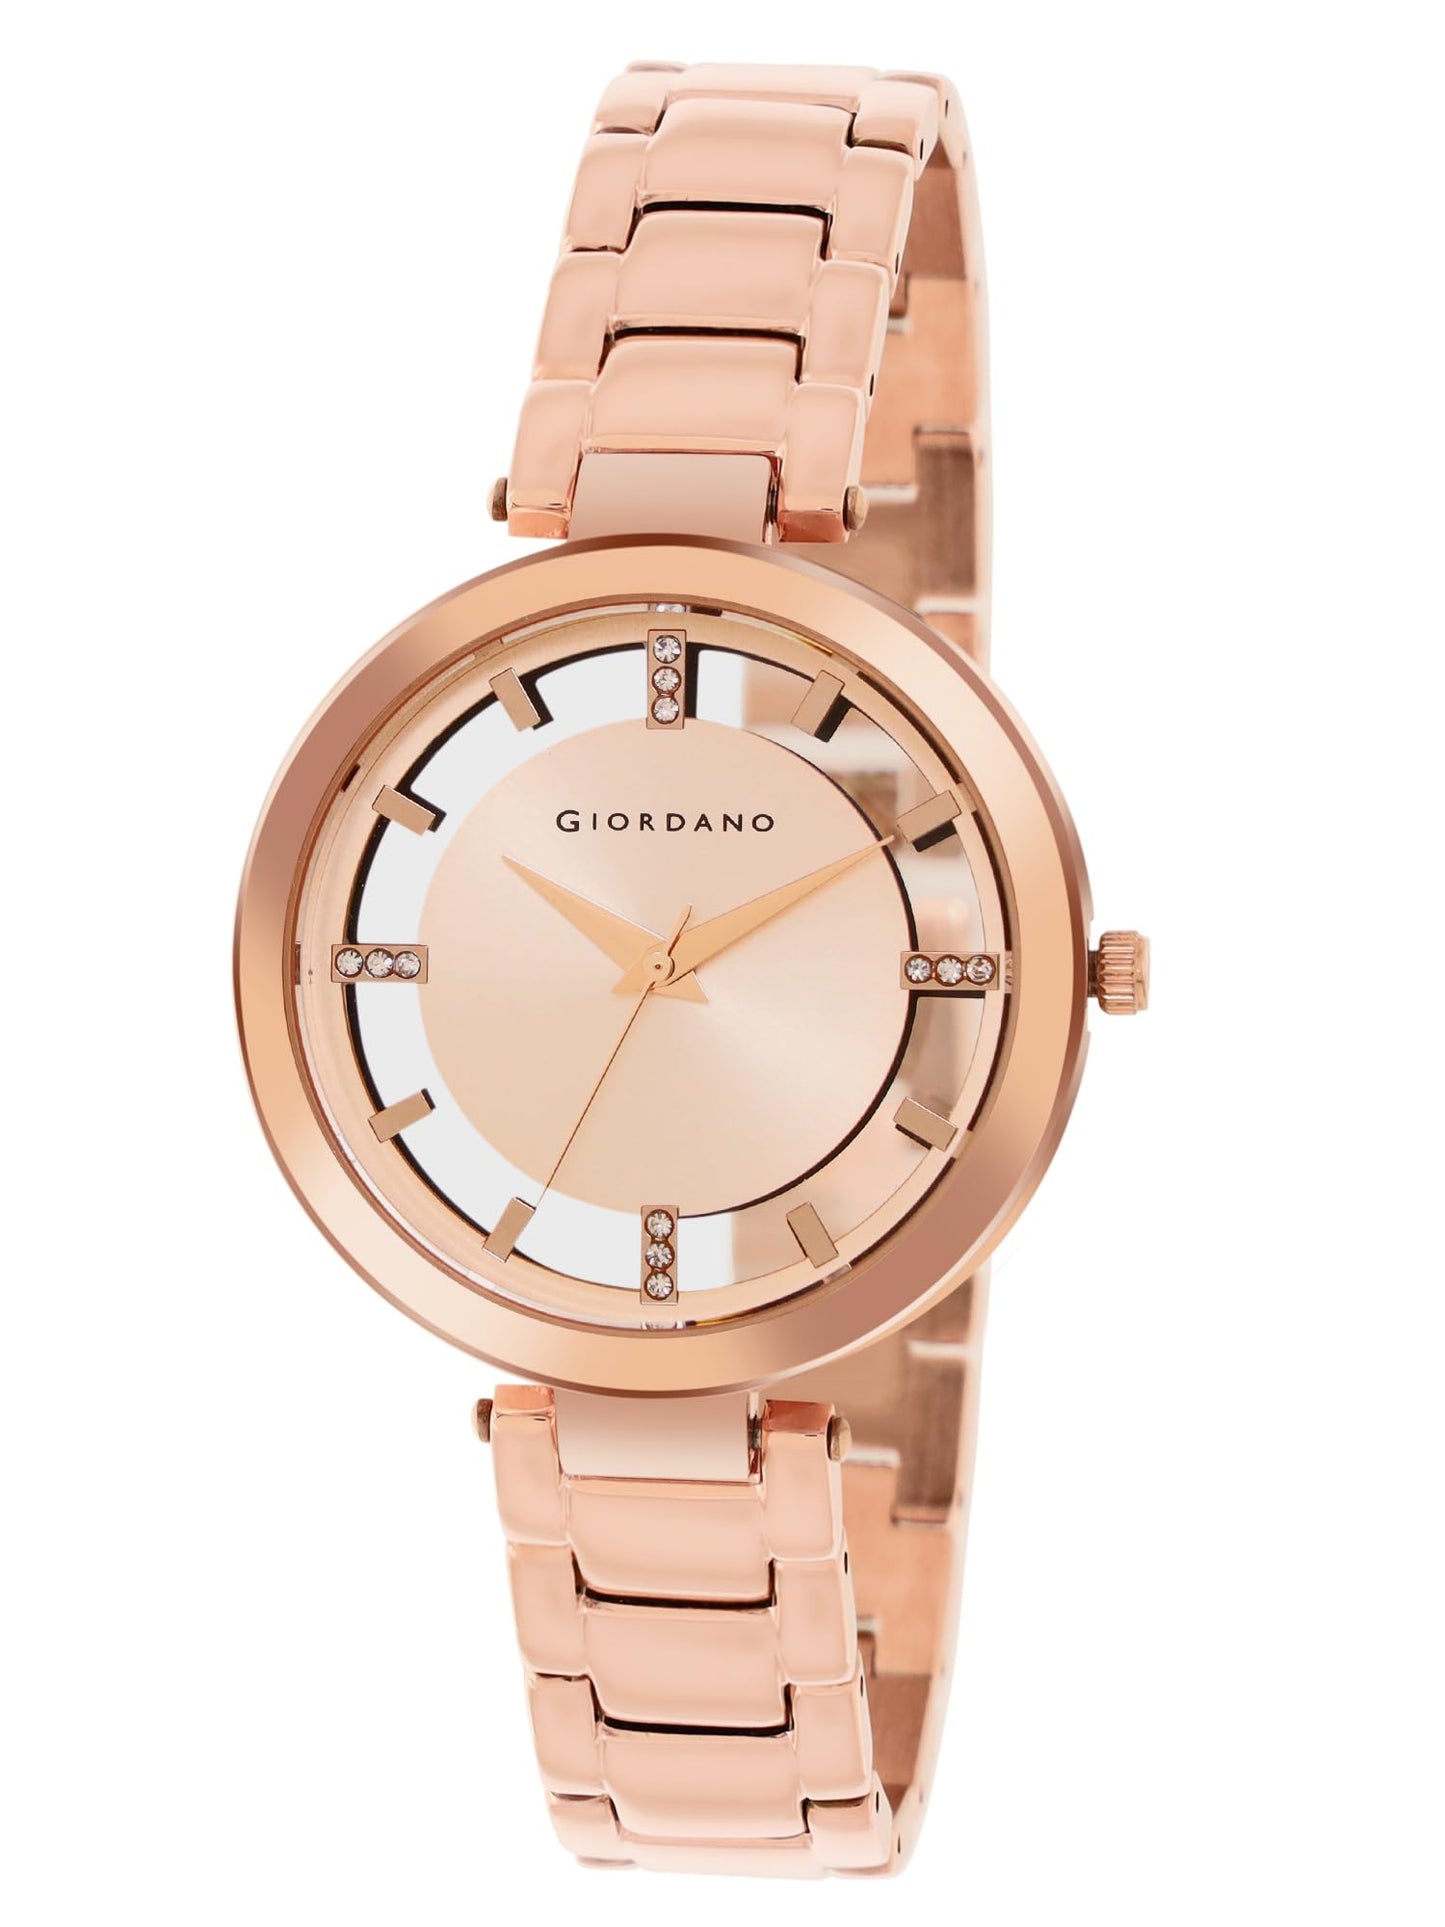 Giordano Analog Stylish | Trendy Wrist Watch for Women Water Resistant Fashion with See Through Classy Dial and Rosegold Strap|Compliment Your Look|Ideal Gift for|Ladies|Girls - GD4207